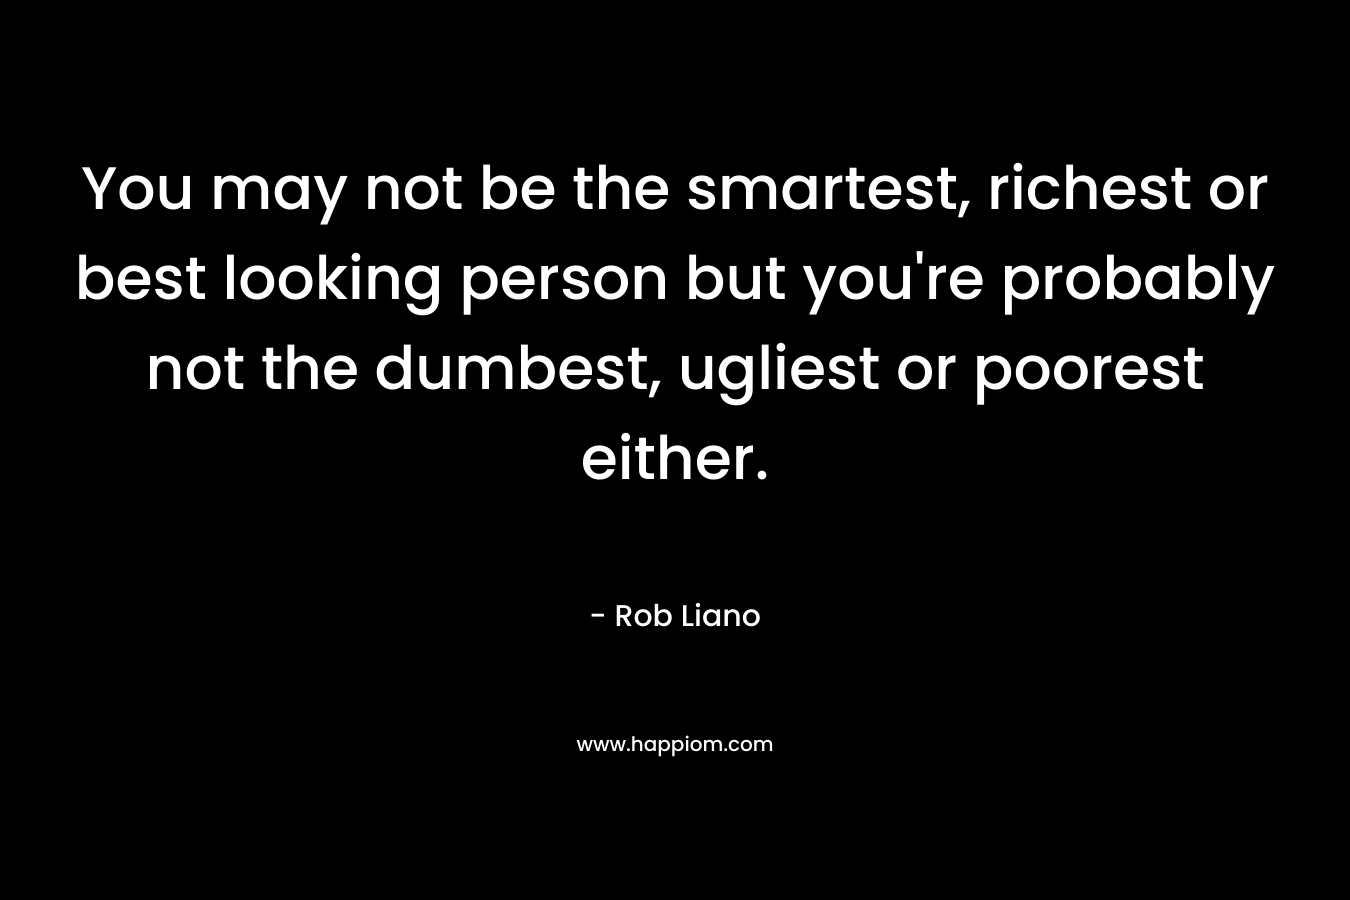 You may not be the smartest, richest or best looking person but you’re probably not the dumbest, ugliest or poorest either. – Rob Liano